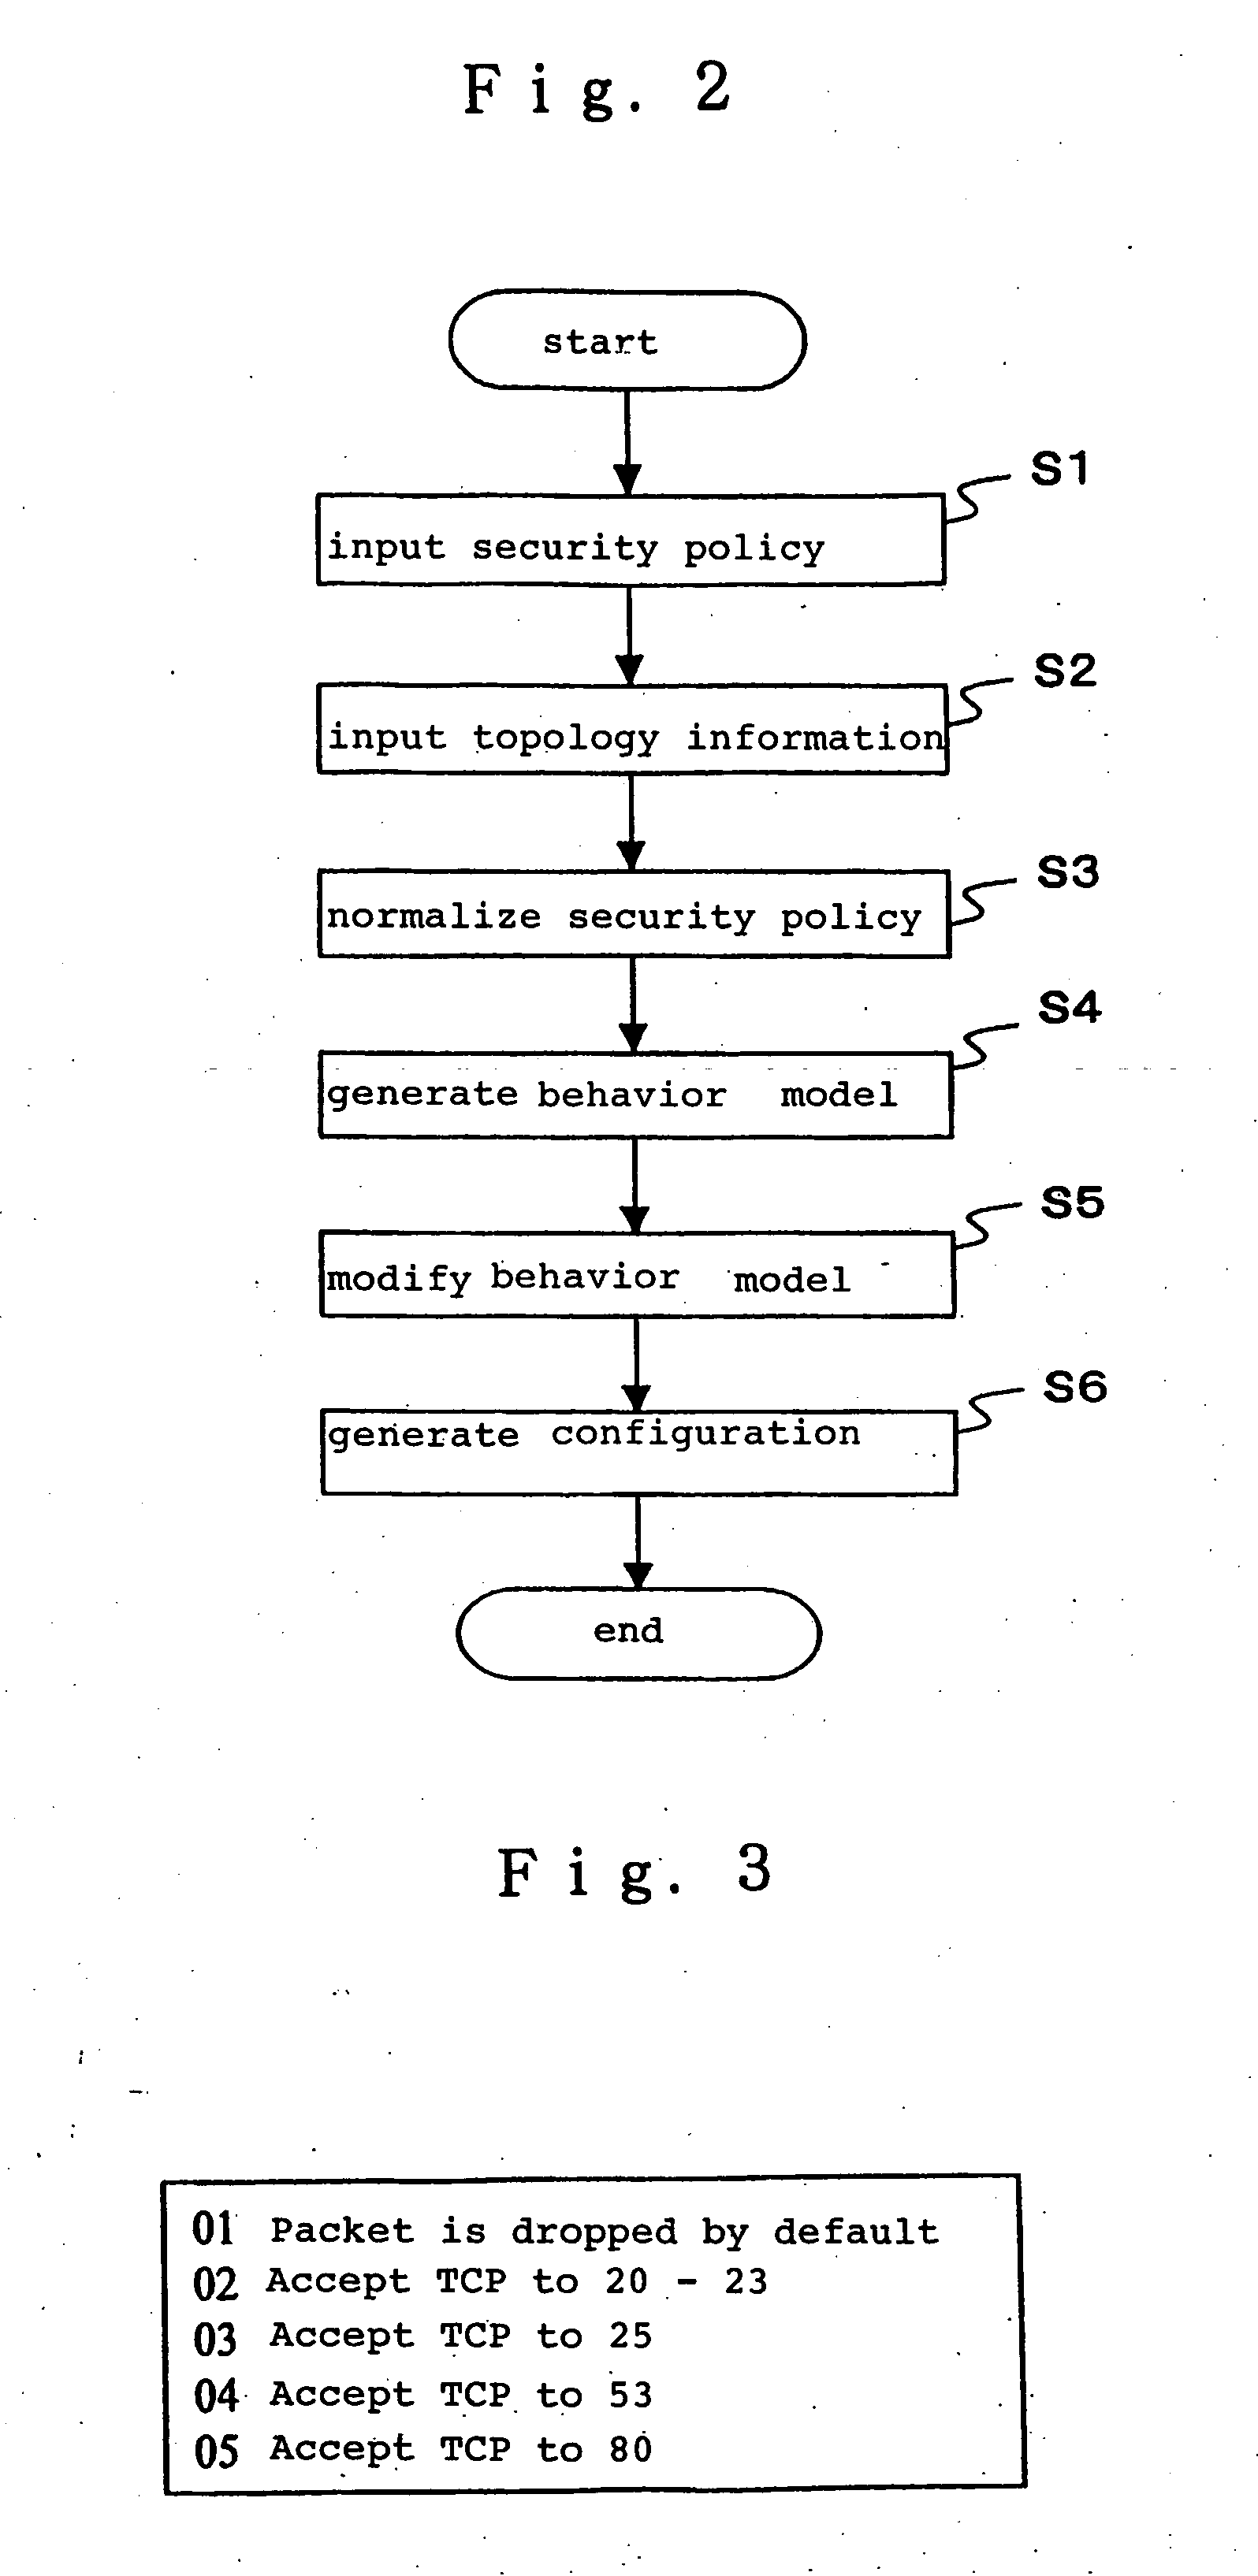 Behavior model generator system for facilitating confirmation of intention of security policy creator